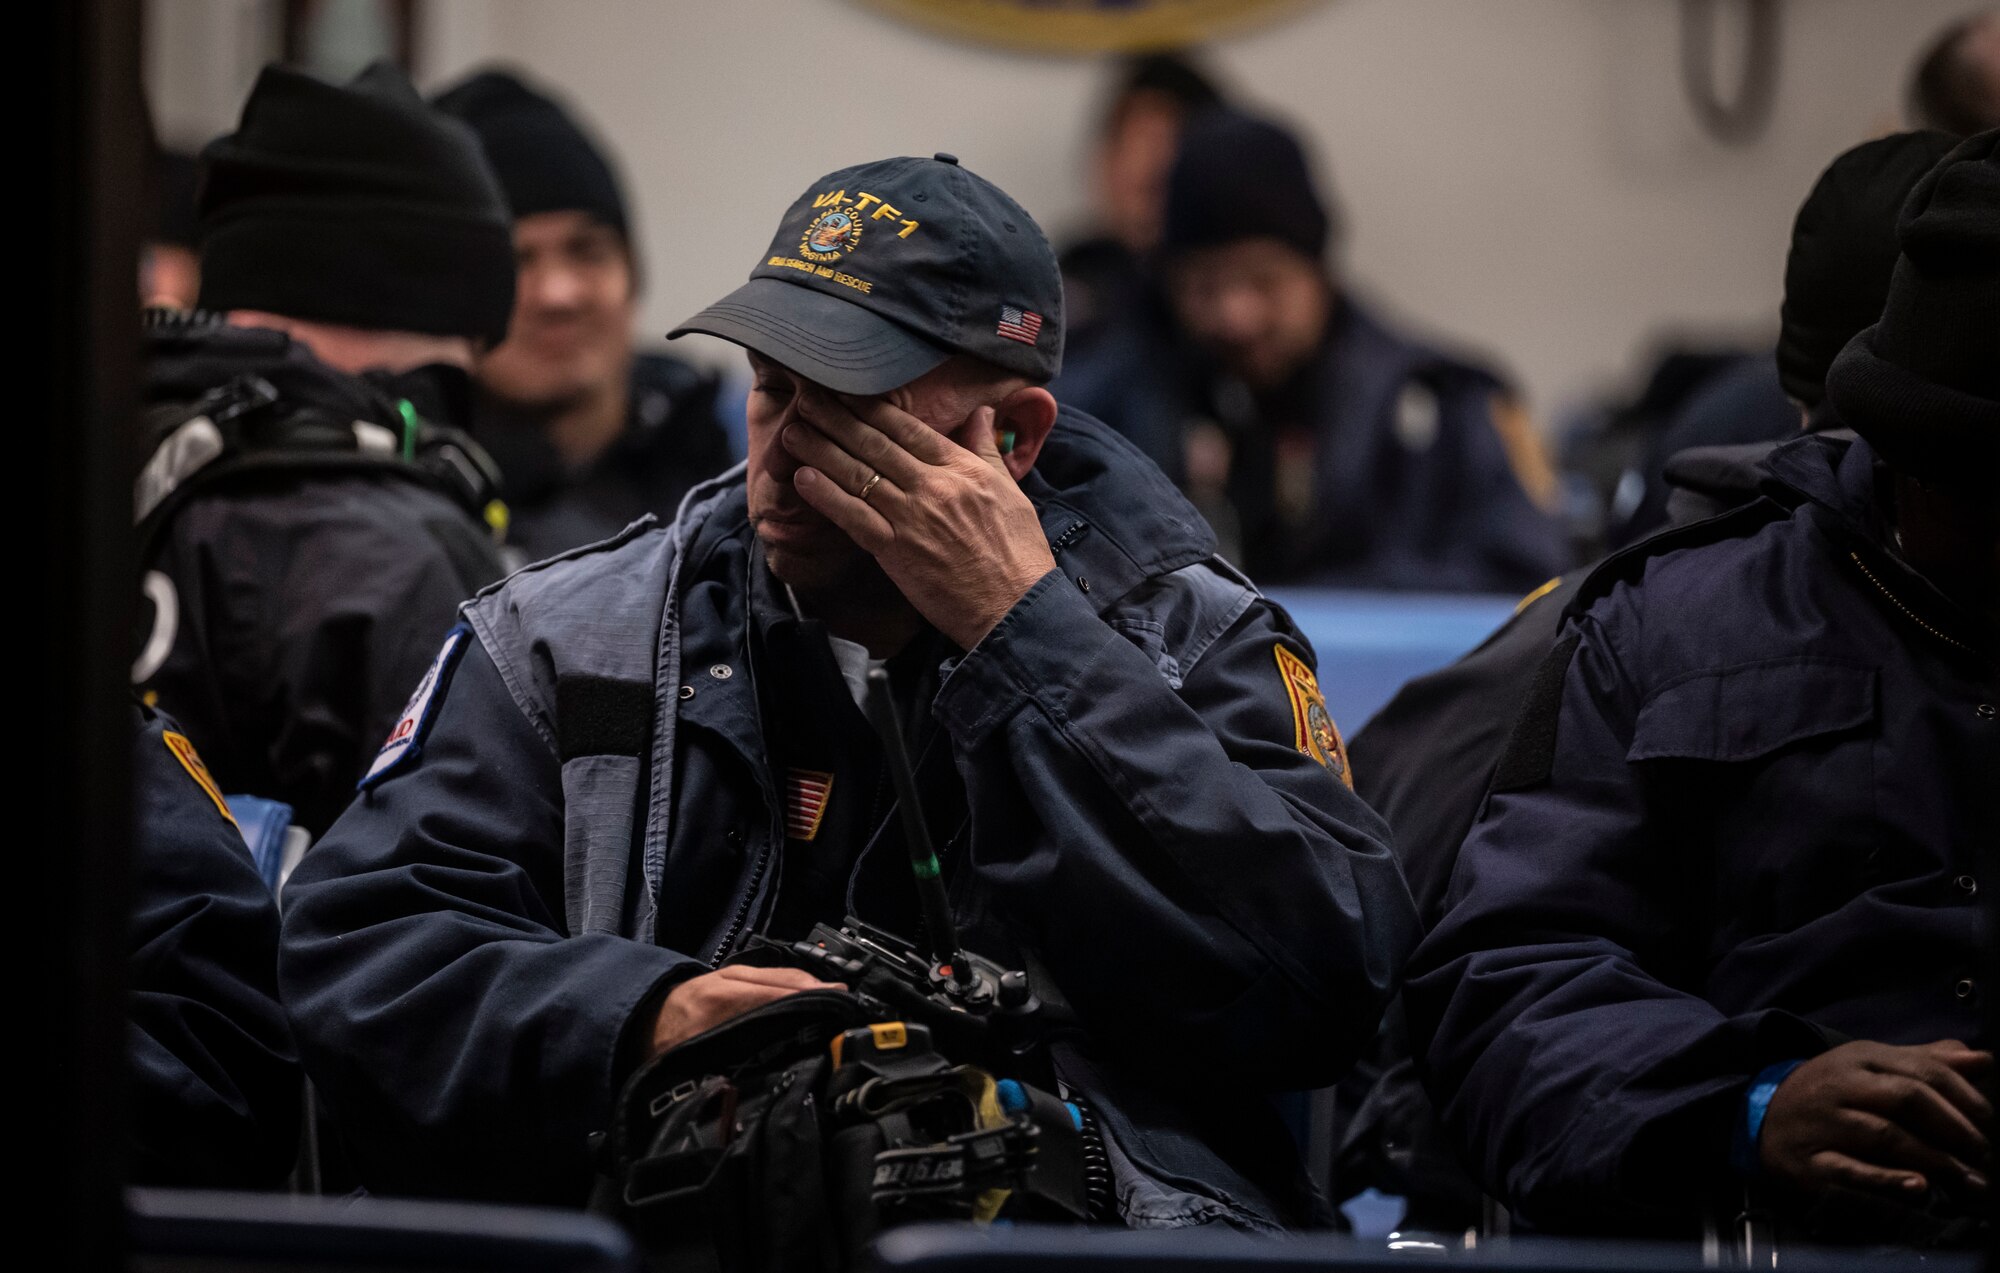 An Urban Search and Rescue member from Fairfax County, Virginia, rubs his eyes while waiting to board a C-17 Globemaster III on Dover Air Force Base, Delaware, Feb. 7, 2023. The U.S. Agency for International Development (USAID) is mobilizing emergency humanitarian assistance to respond to the devastating impacts in Türkiye following the worst earthquake to hit the region in almost a century. (U.S. Air Force photo by Staff Sgt. Marco A. Gomez)